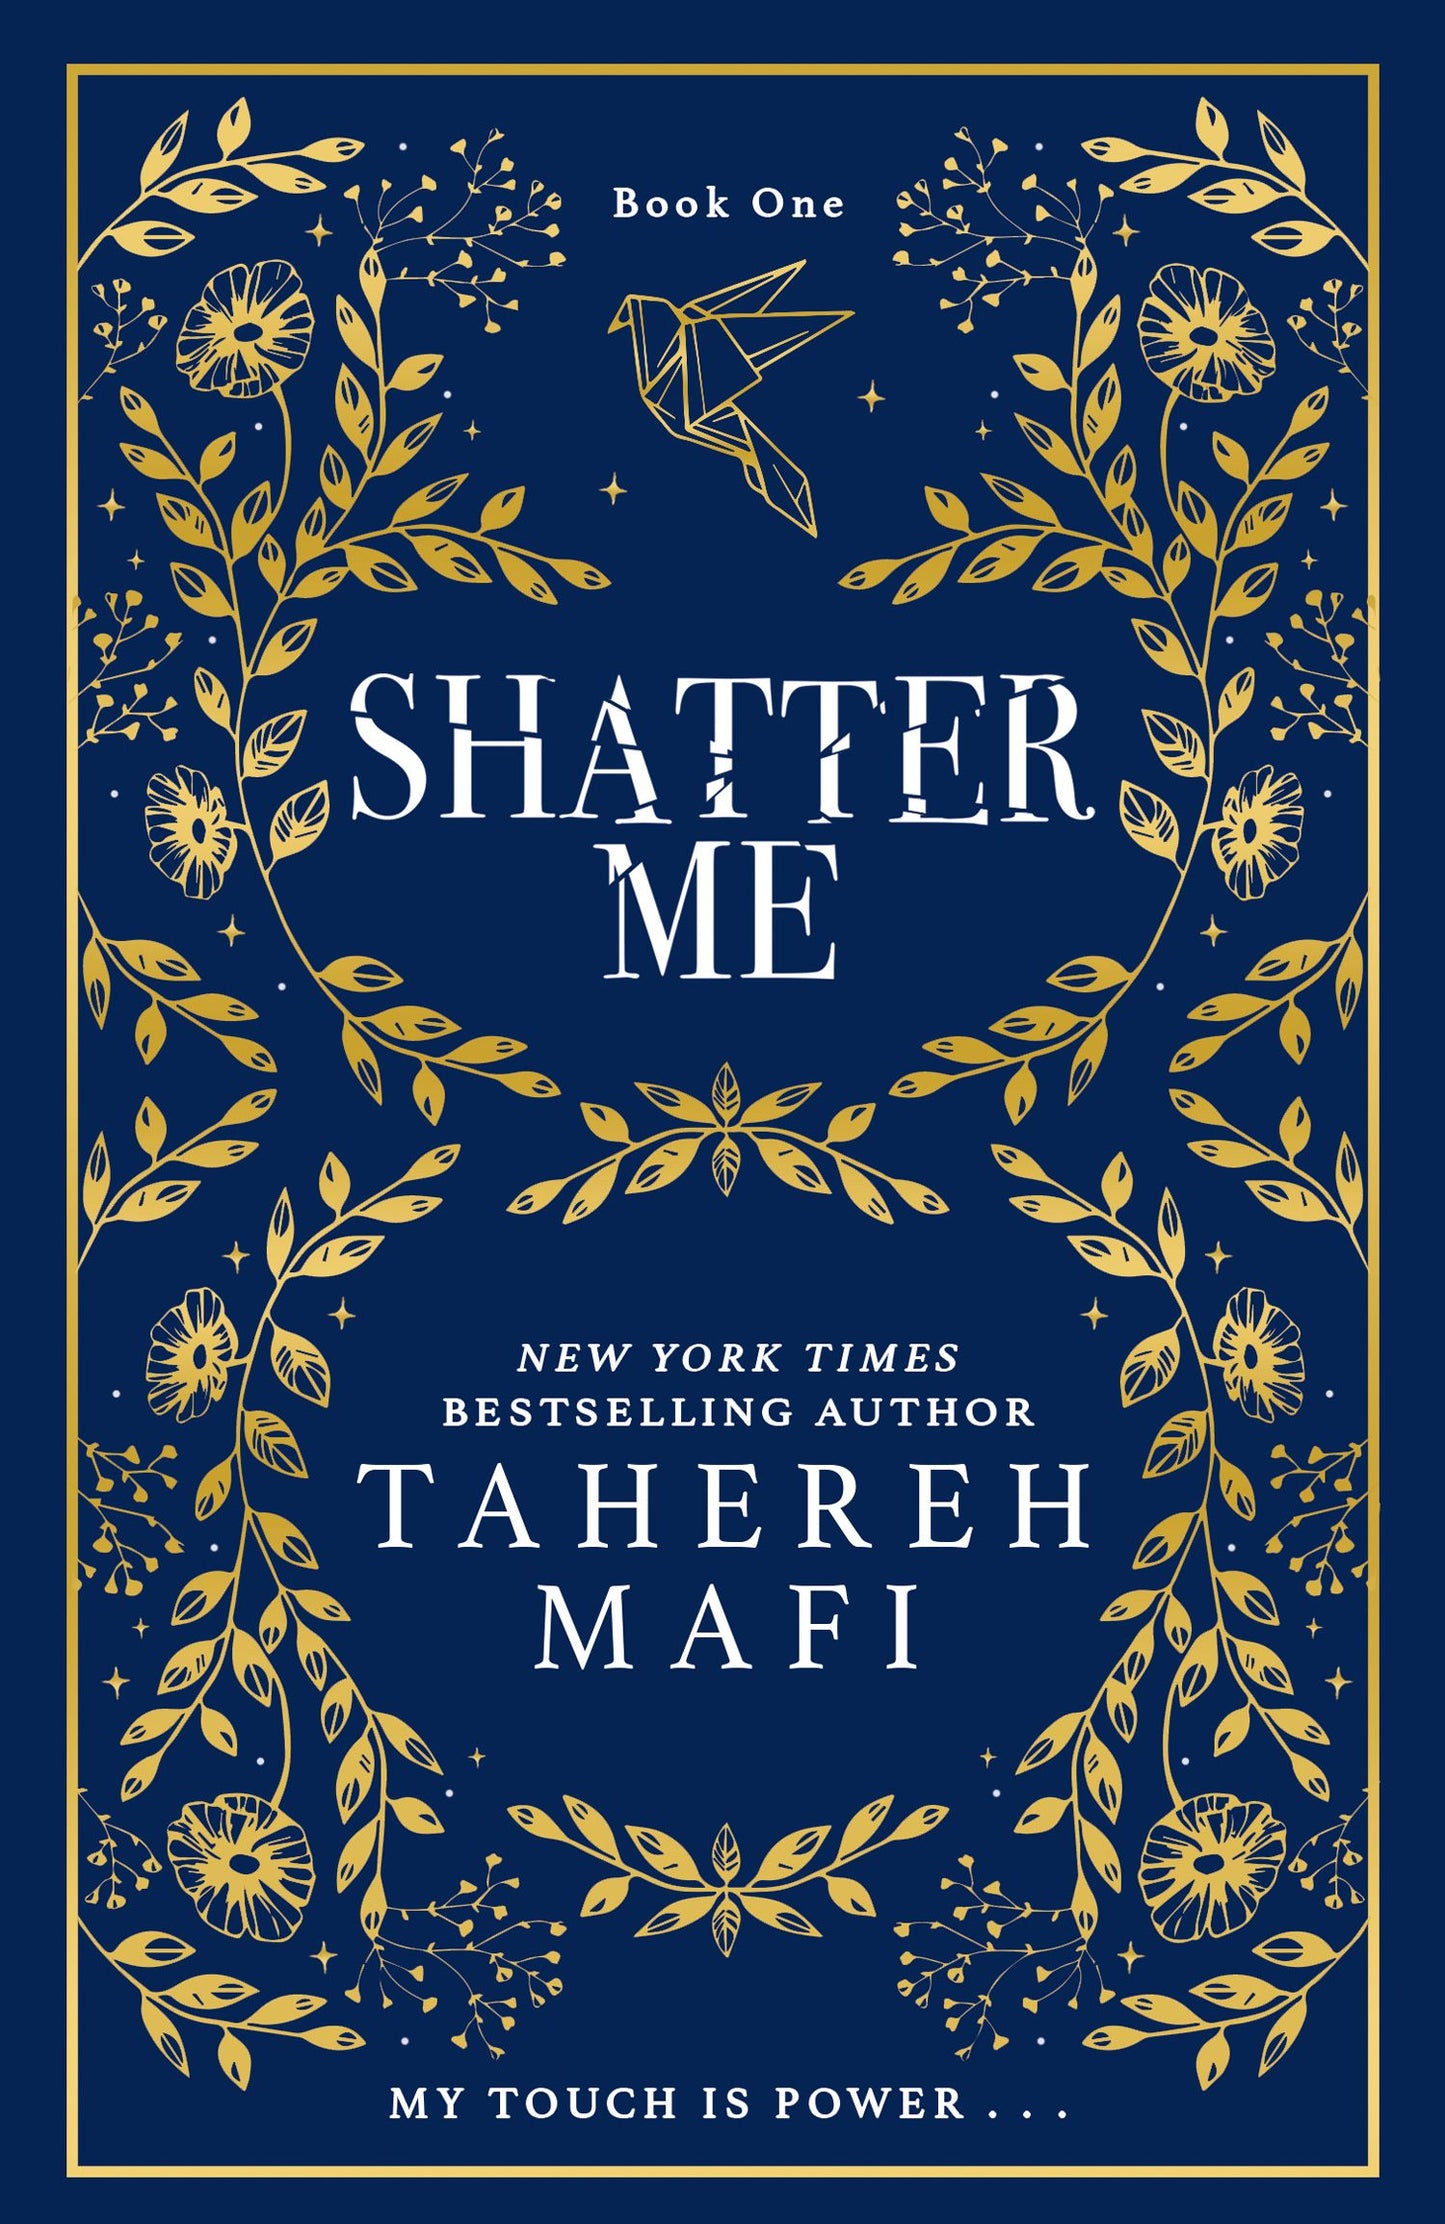 Shatter Me (Special Collectors Edition)